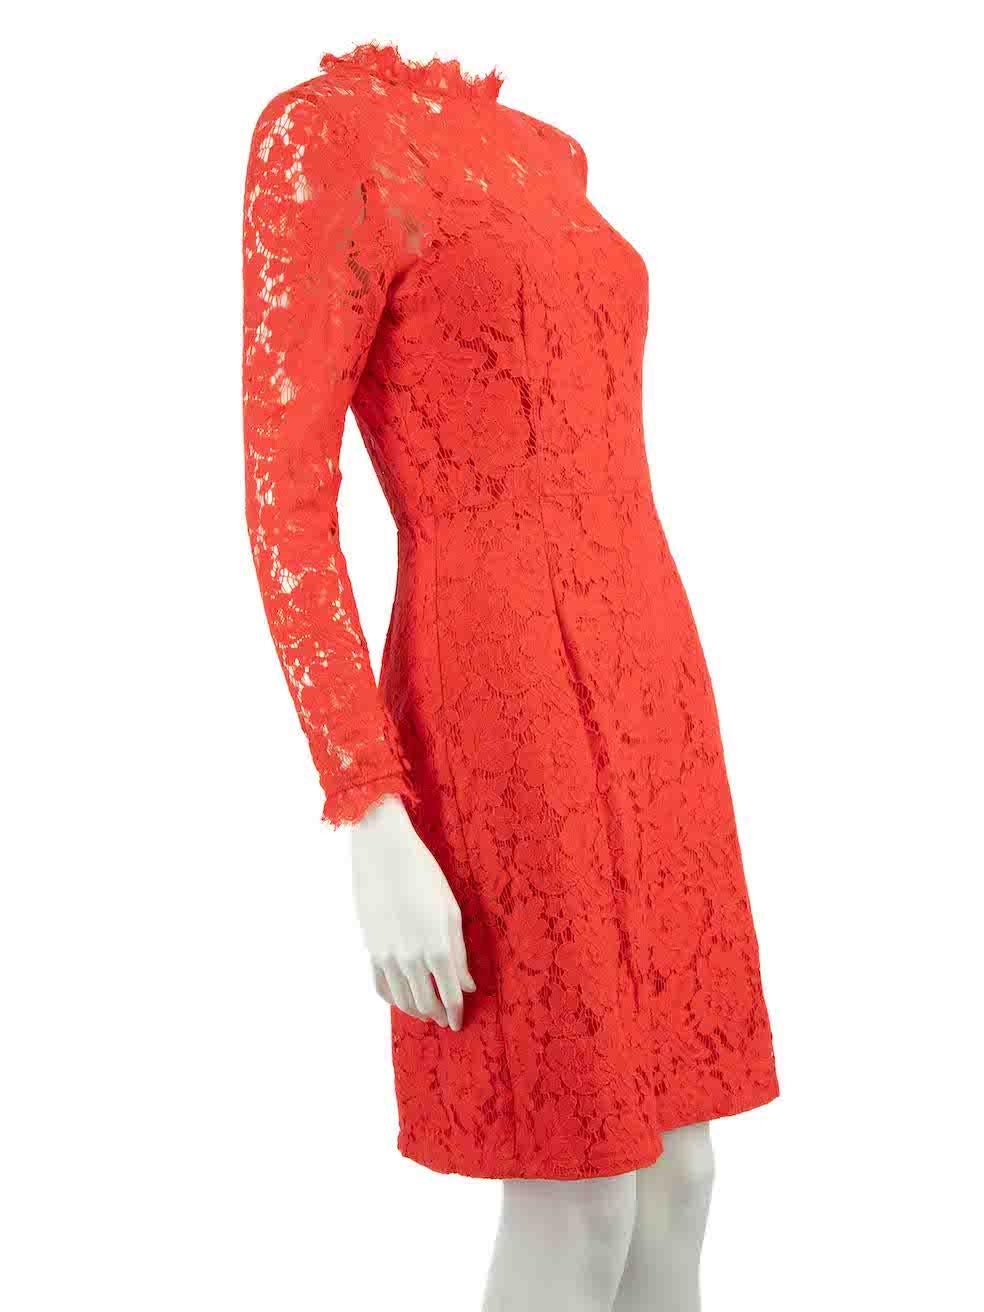 CONDITION is Very good. Minimal wear to dress is evident. Minimal wear to the skirt lining with a pull to the weave and the lace trims have started to fray at the cuffs and hem on this used Temperley London designer resale item.
 
 Details
 Red 
